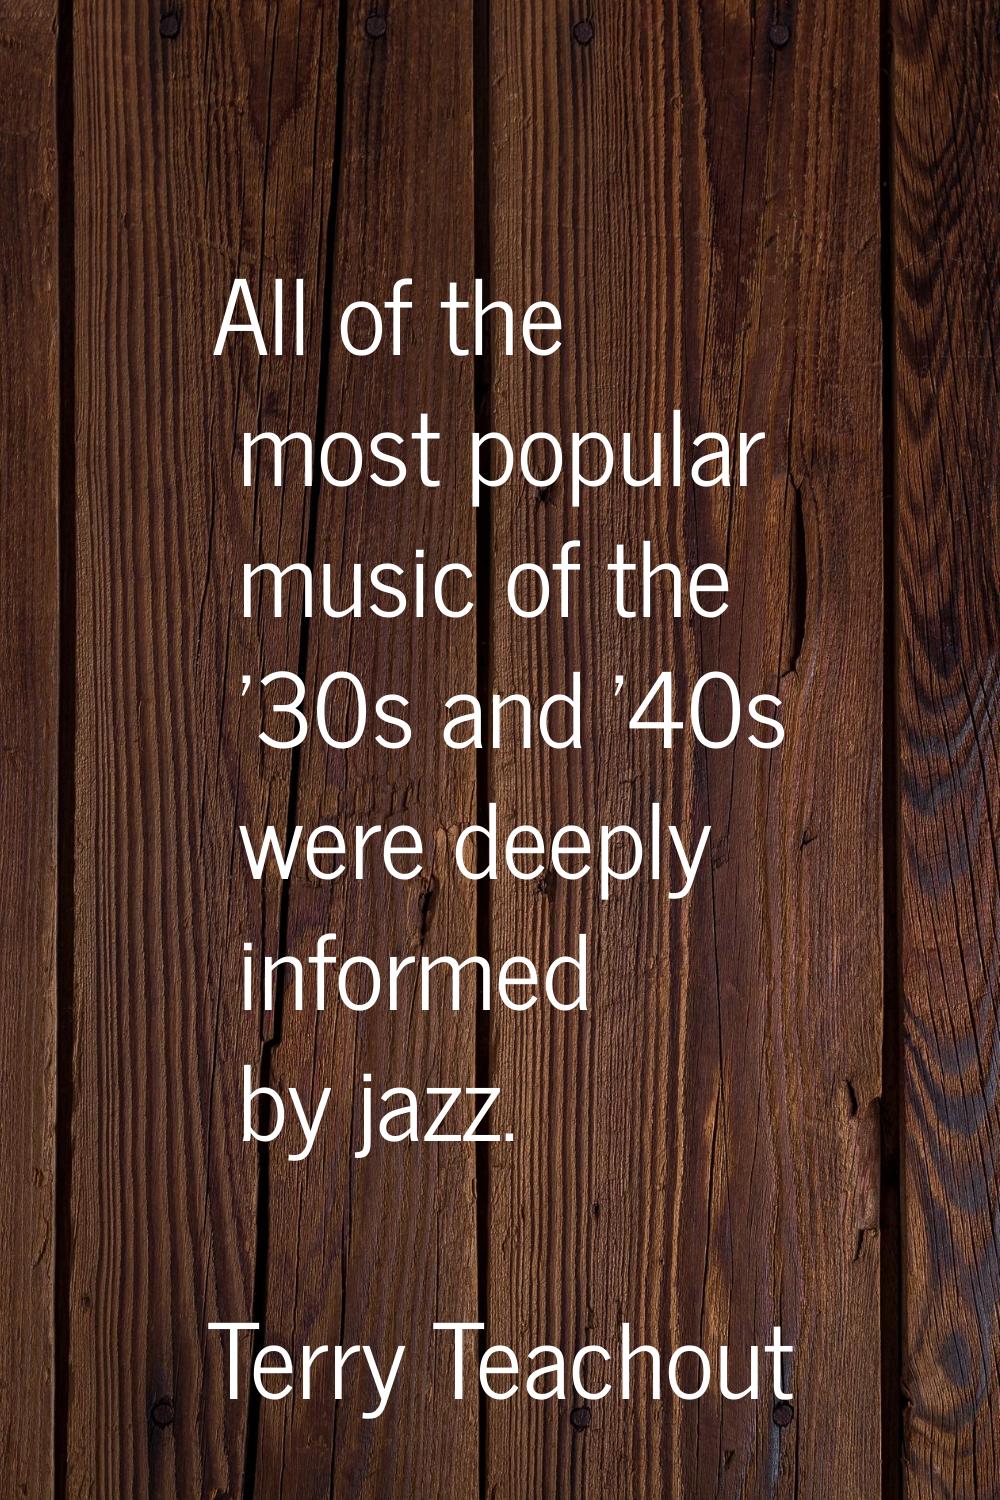 All of the most popular music of the '30s and '40s were deeply informed by jazz.